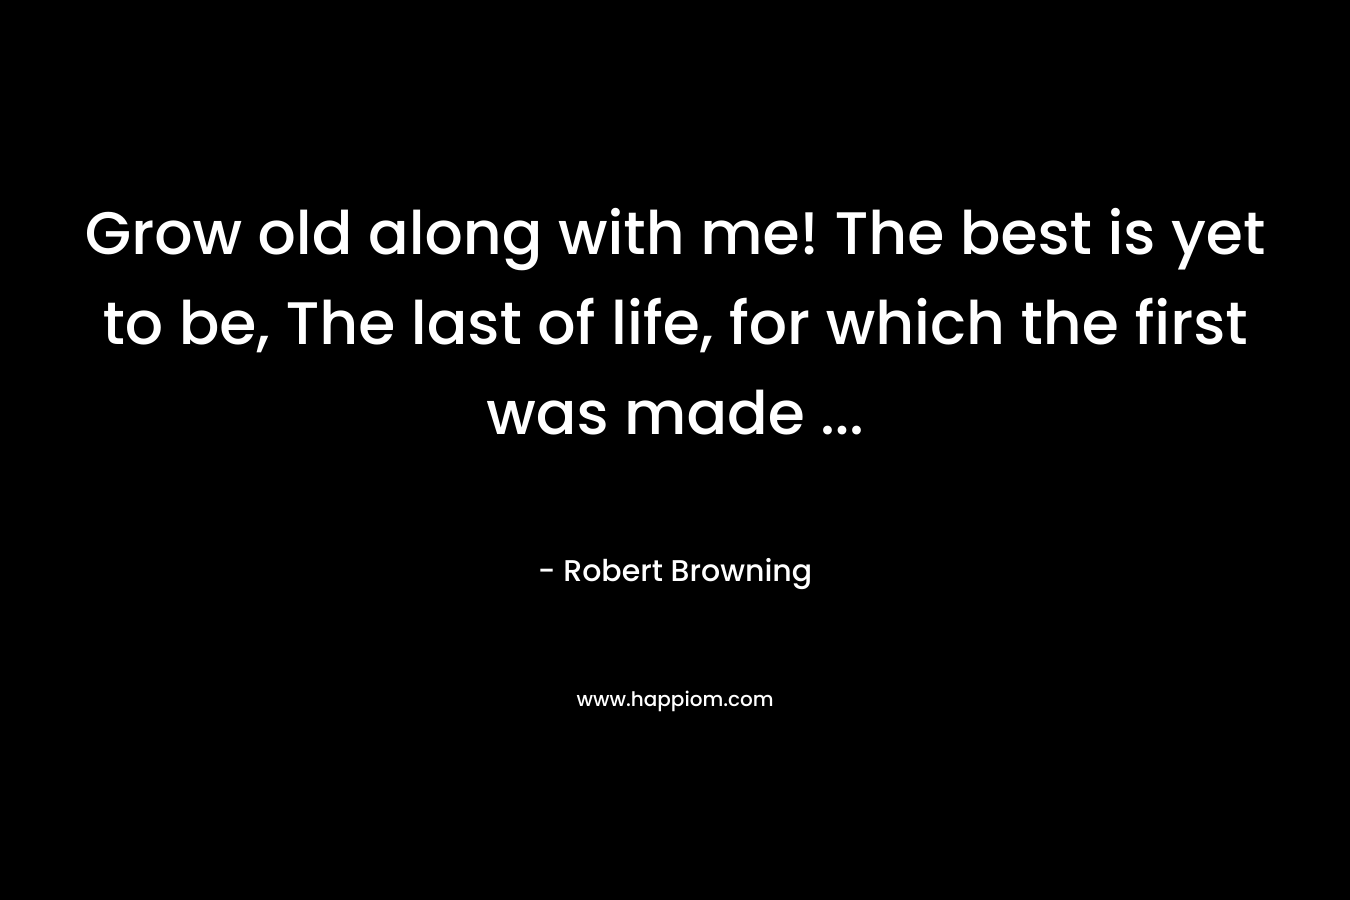 Grow old along with me! The best is yet to be, The last of life, for which the first was made ...